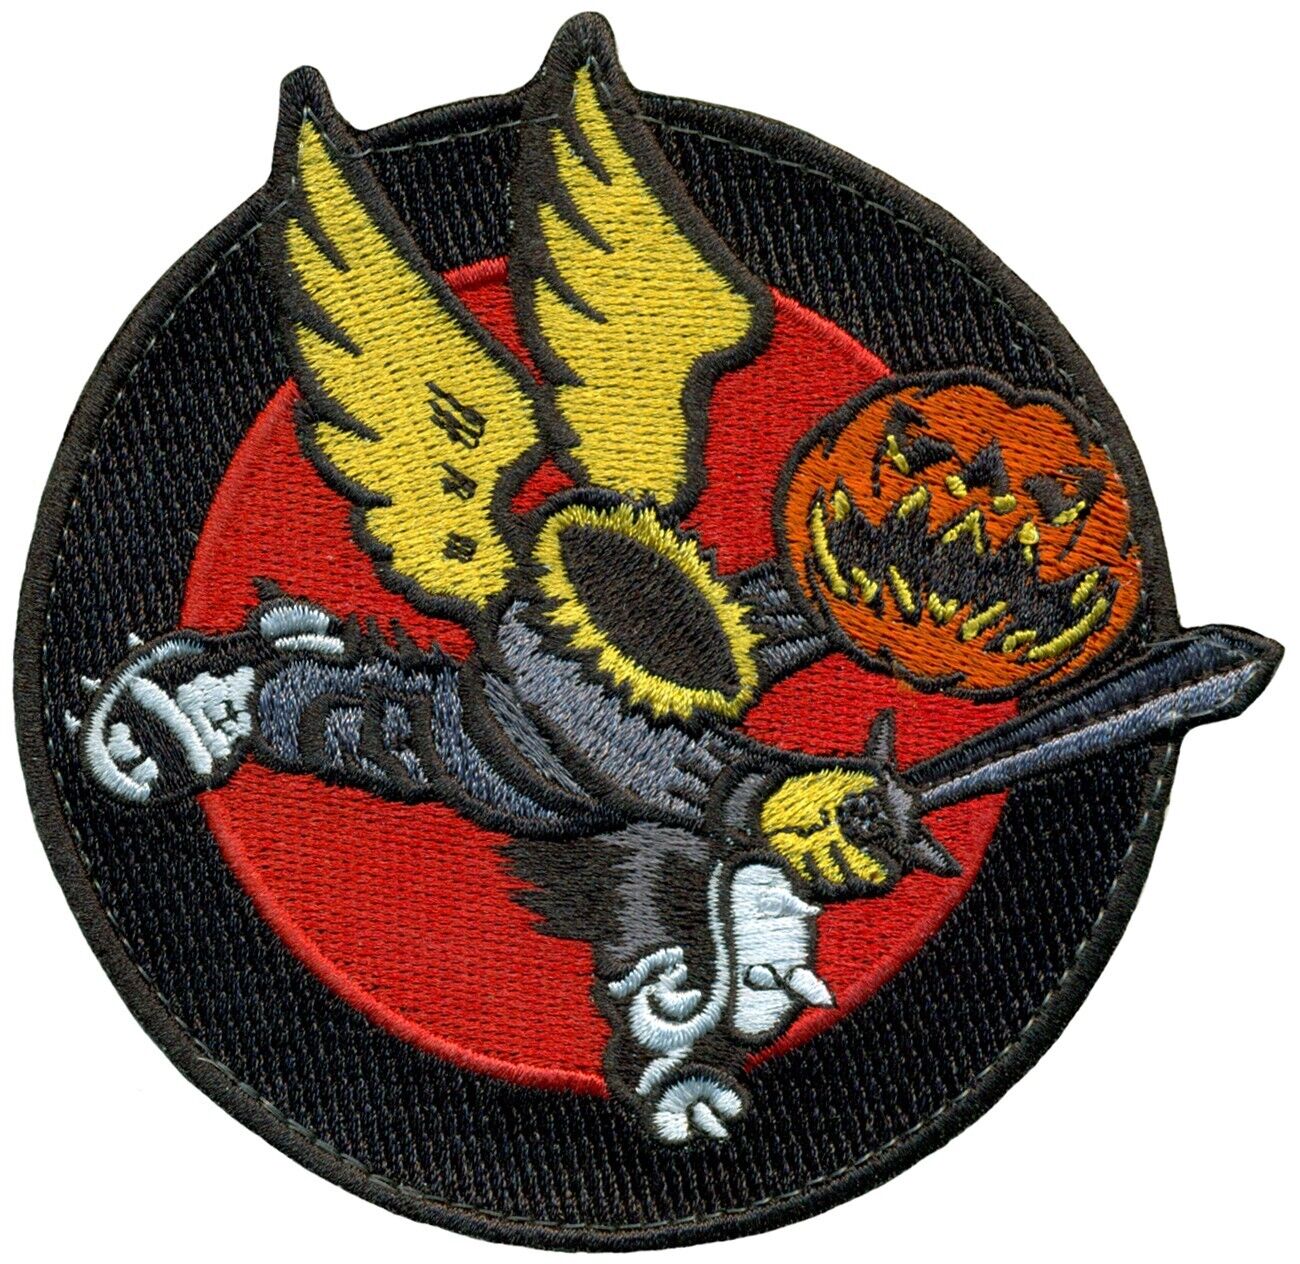 USAF 124th ATTACK SQUADRON HALLOWEEN PATCH